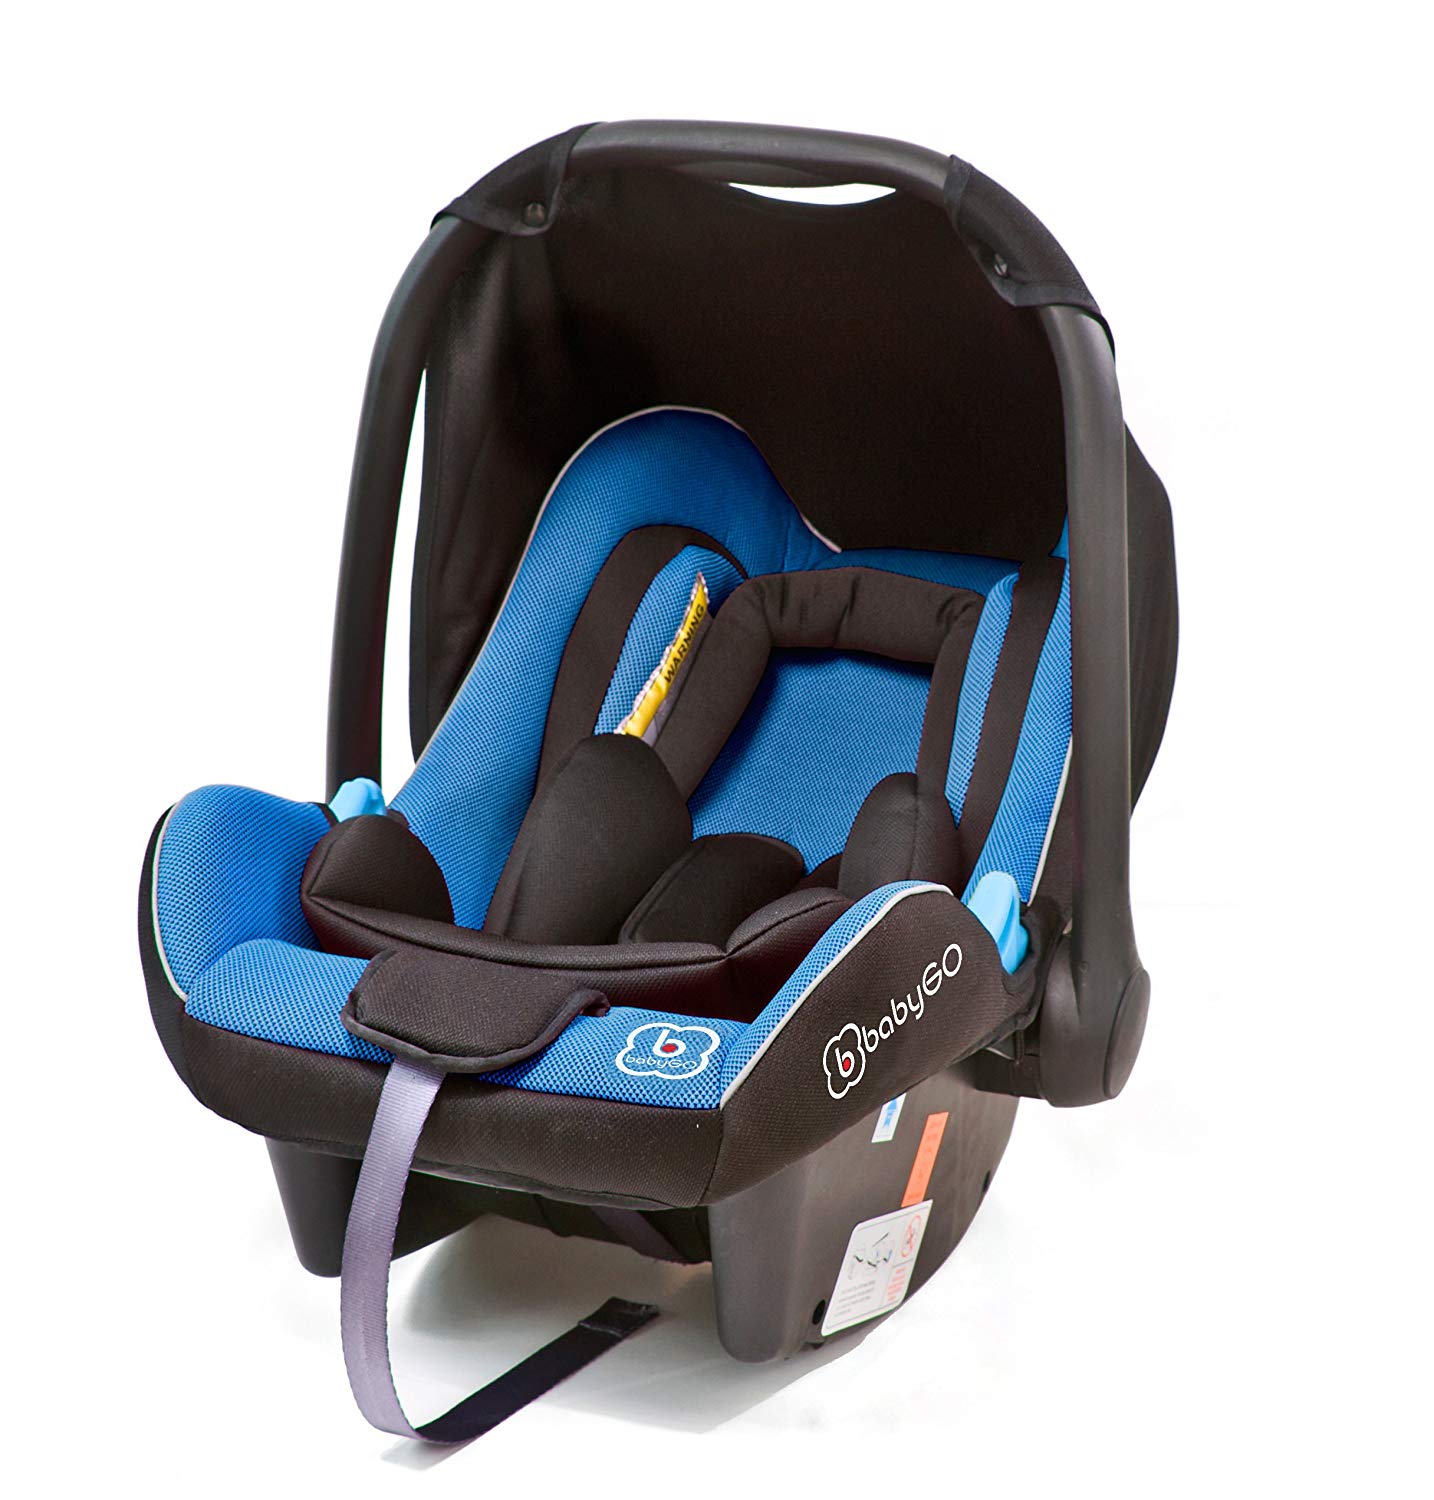 BabyGo 1205 Travel XP Side Protect with EPS System